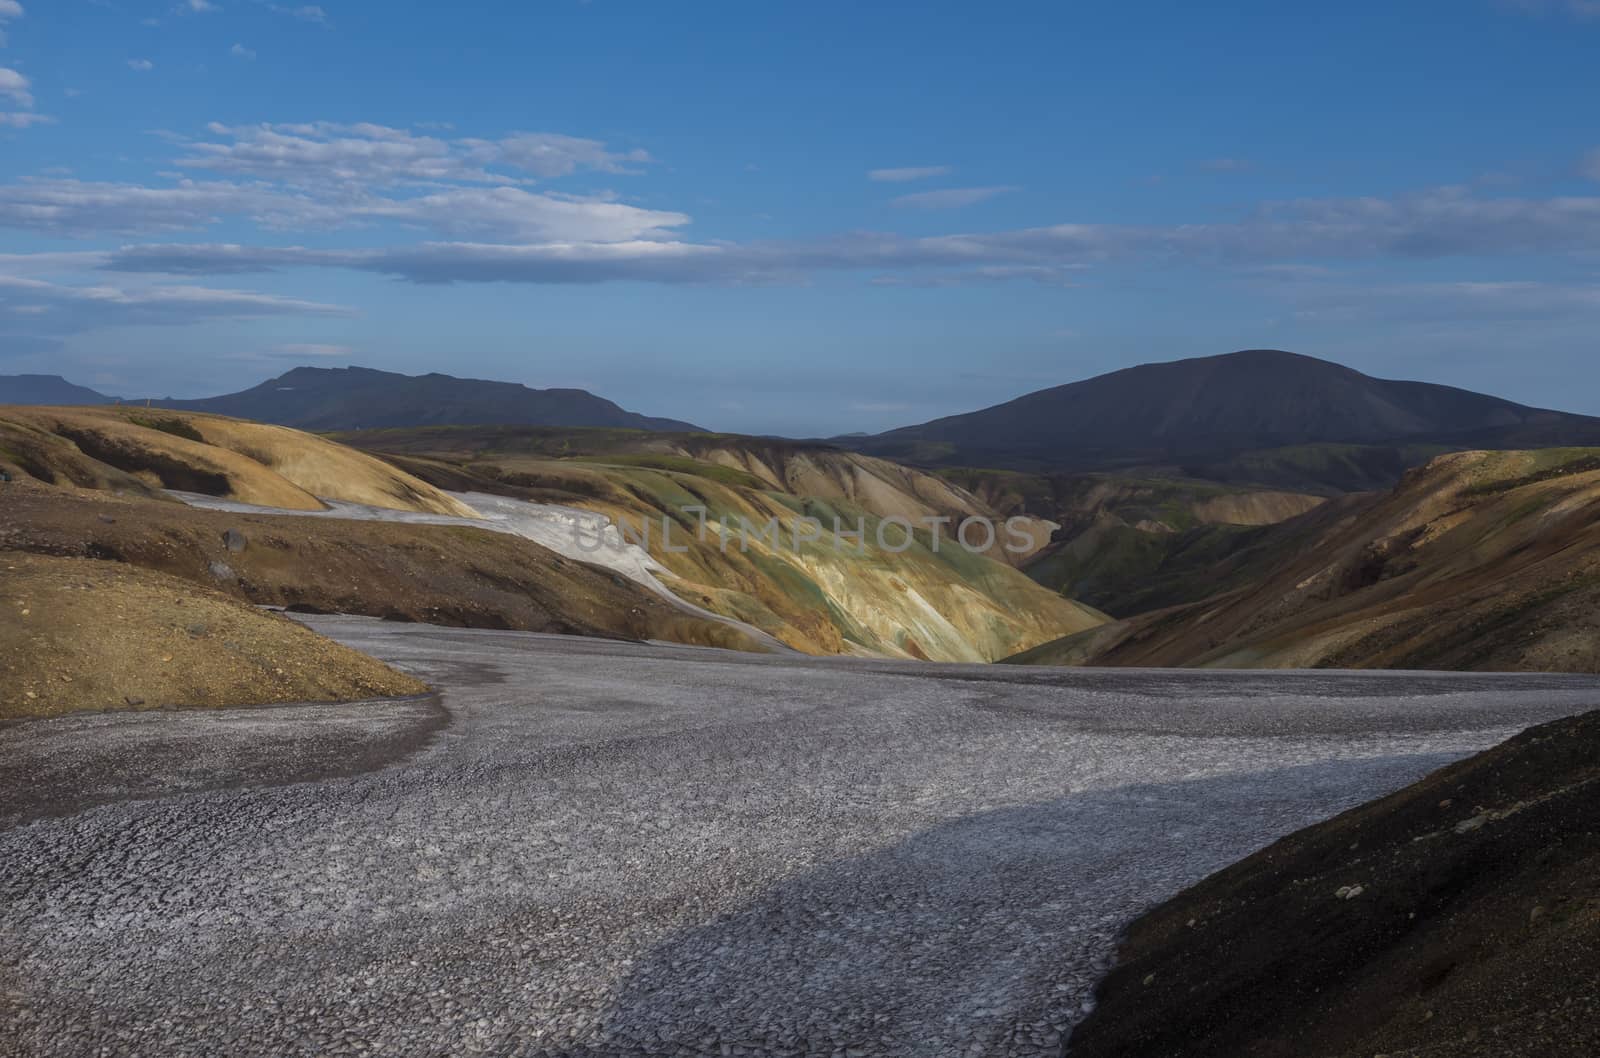 Colorful Rhyolit mountain panorma with snow fiields and multicolored volcanos in Landmannalaugar area of Fjallabak Nature Reserve in Highlands region of Iceland.